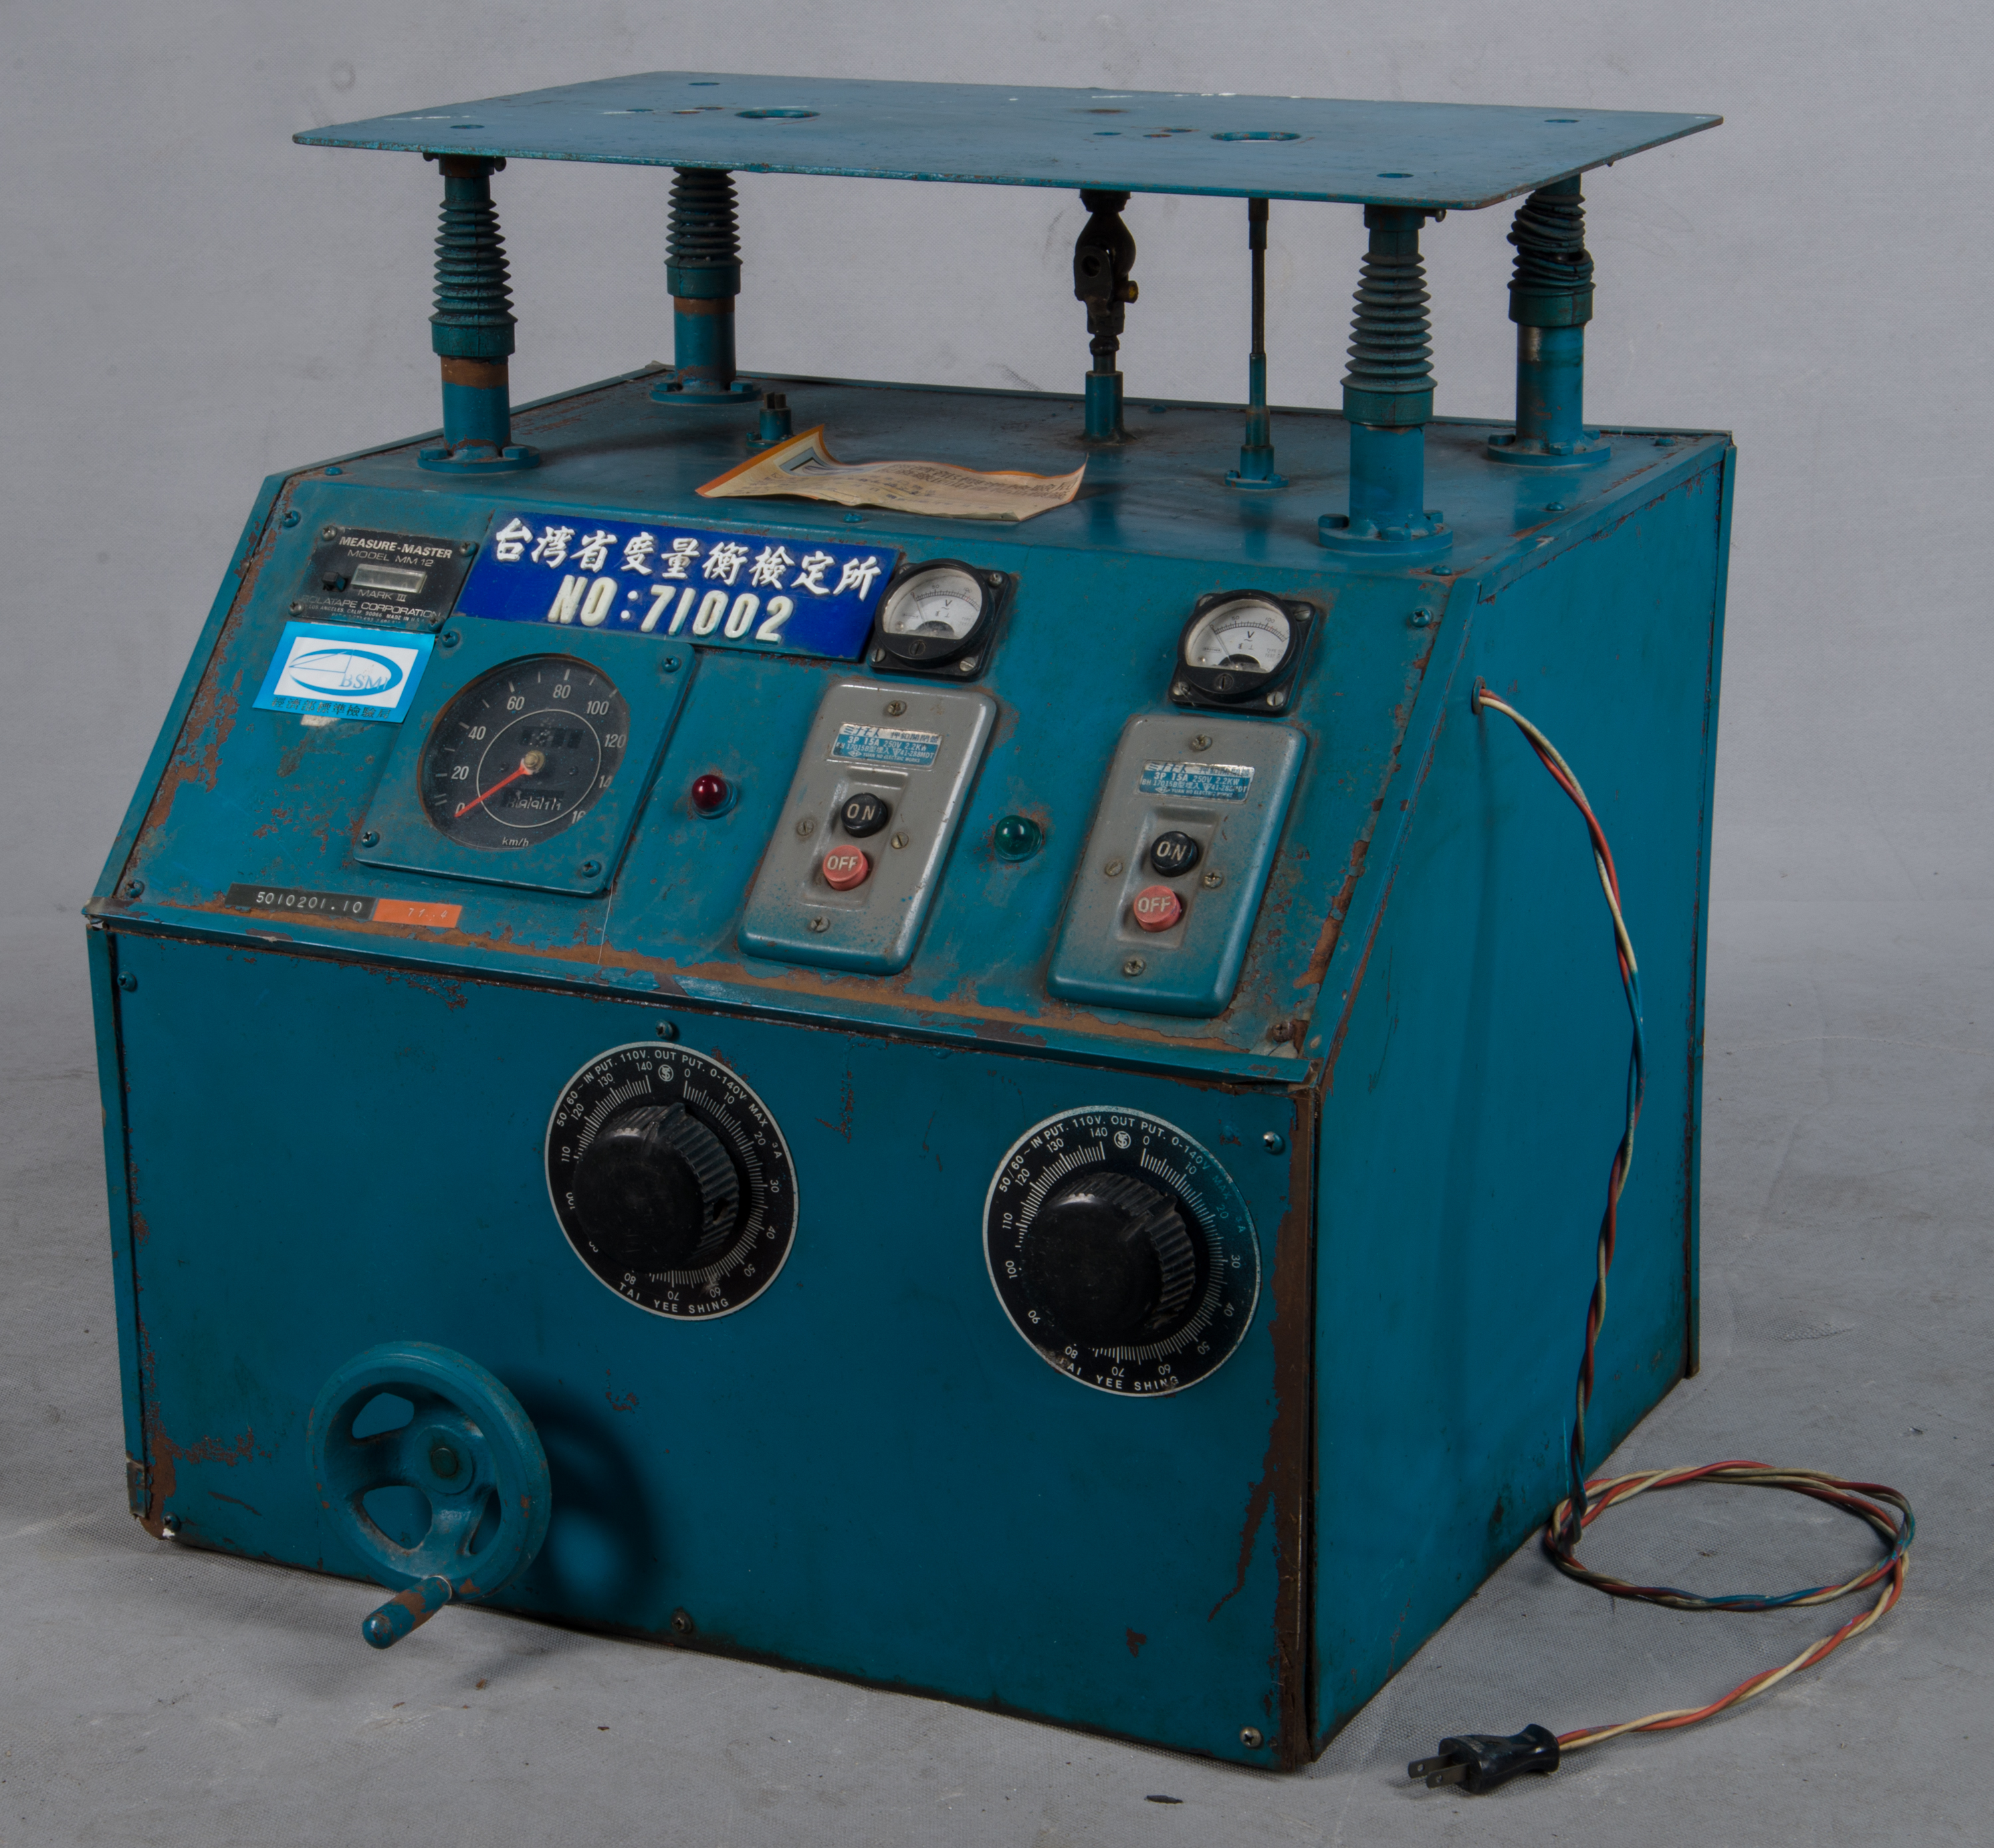 Vibration tester,Total 1 pictures